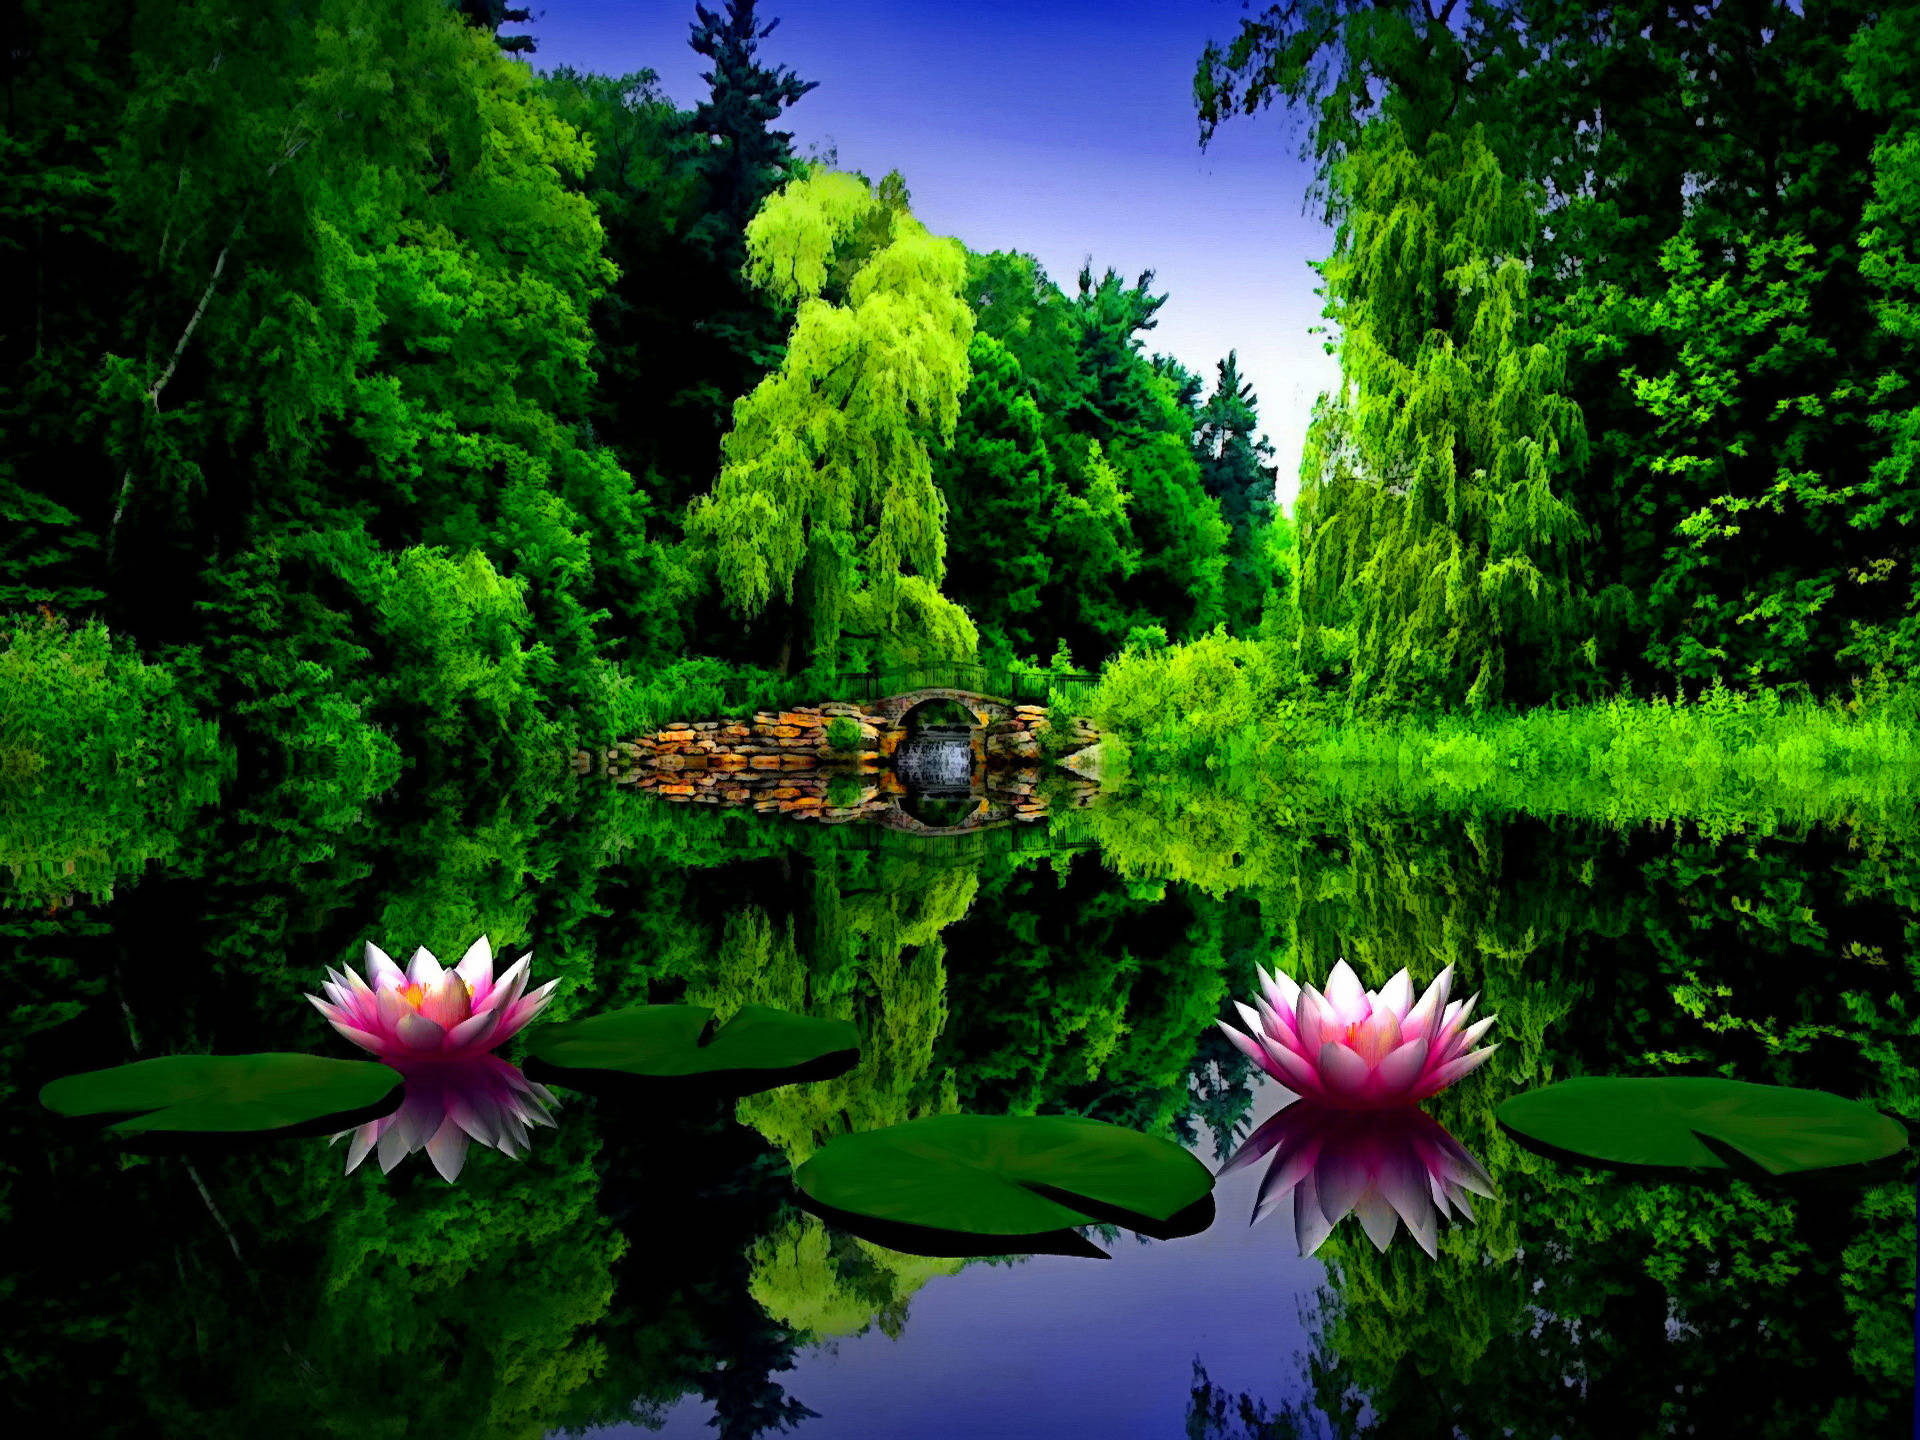 Park Lotus And Lily Pads Wallpaper